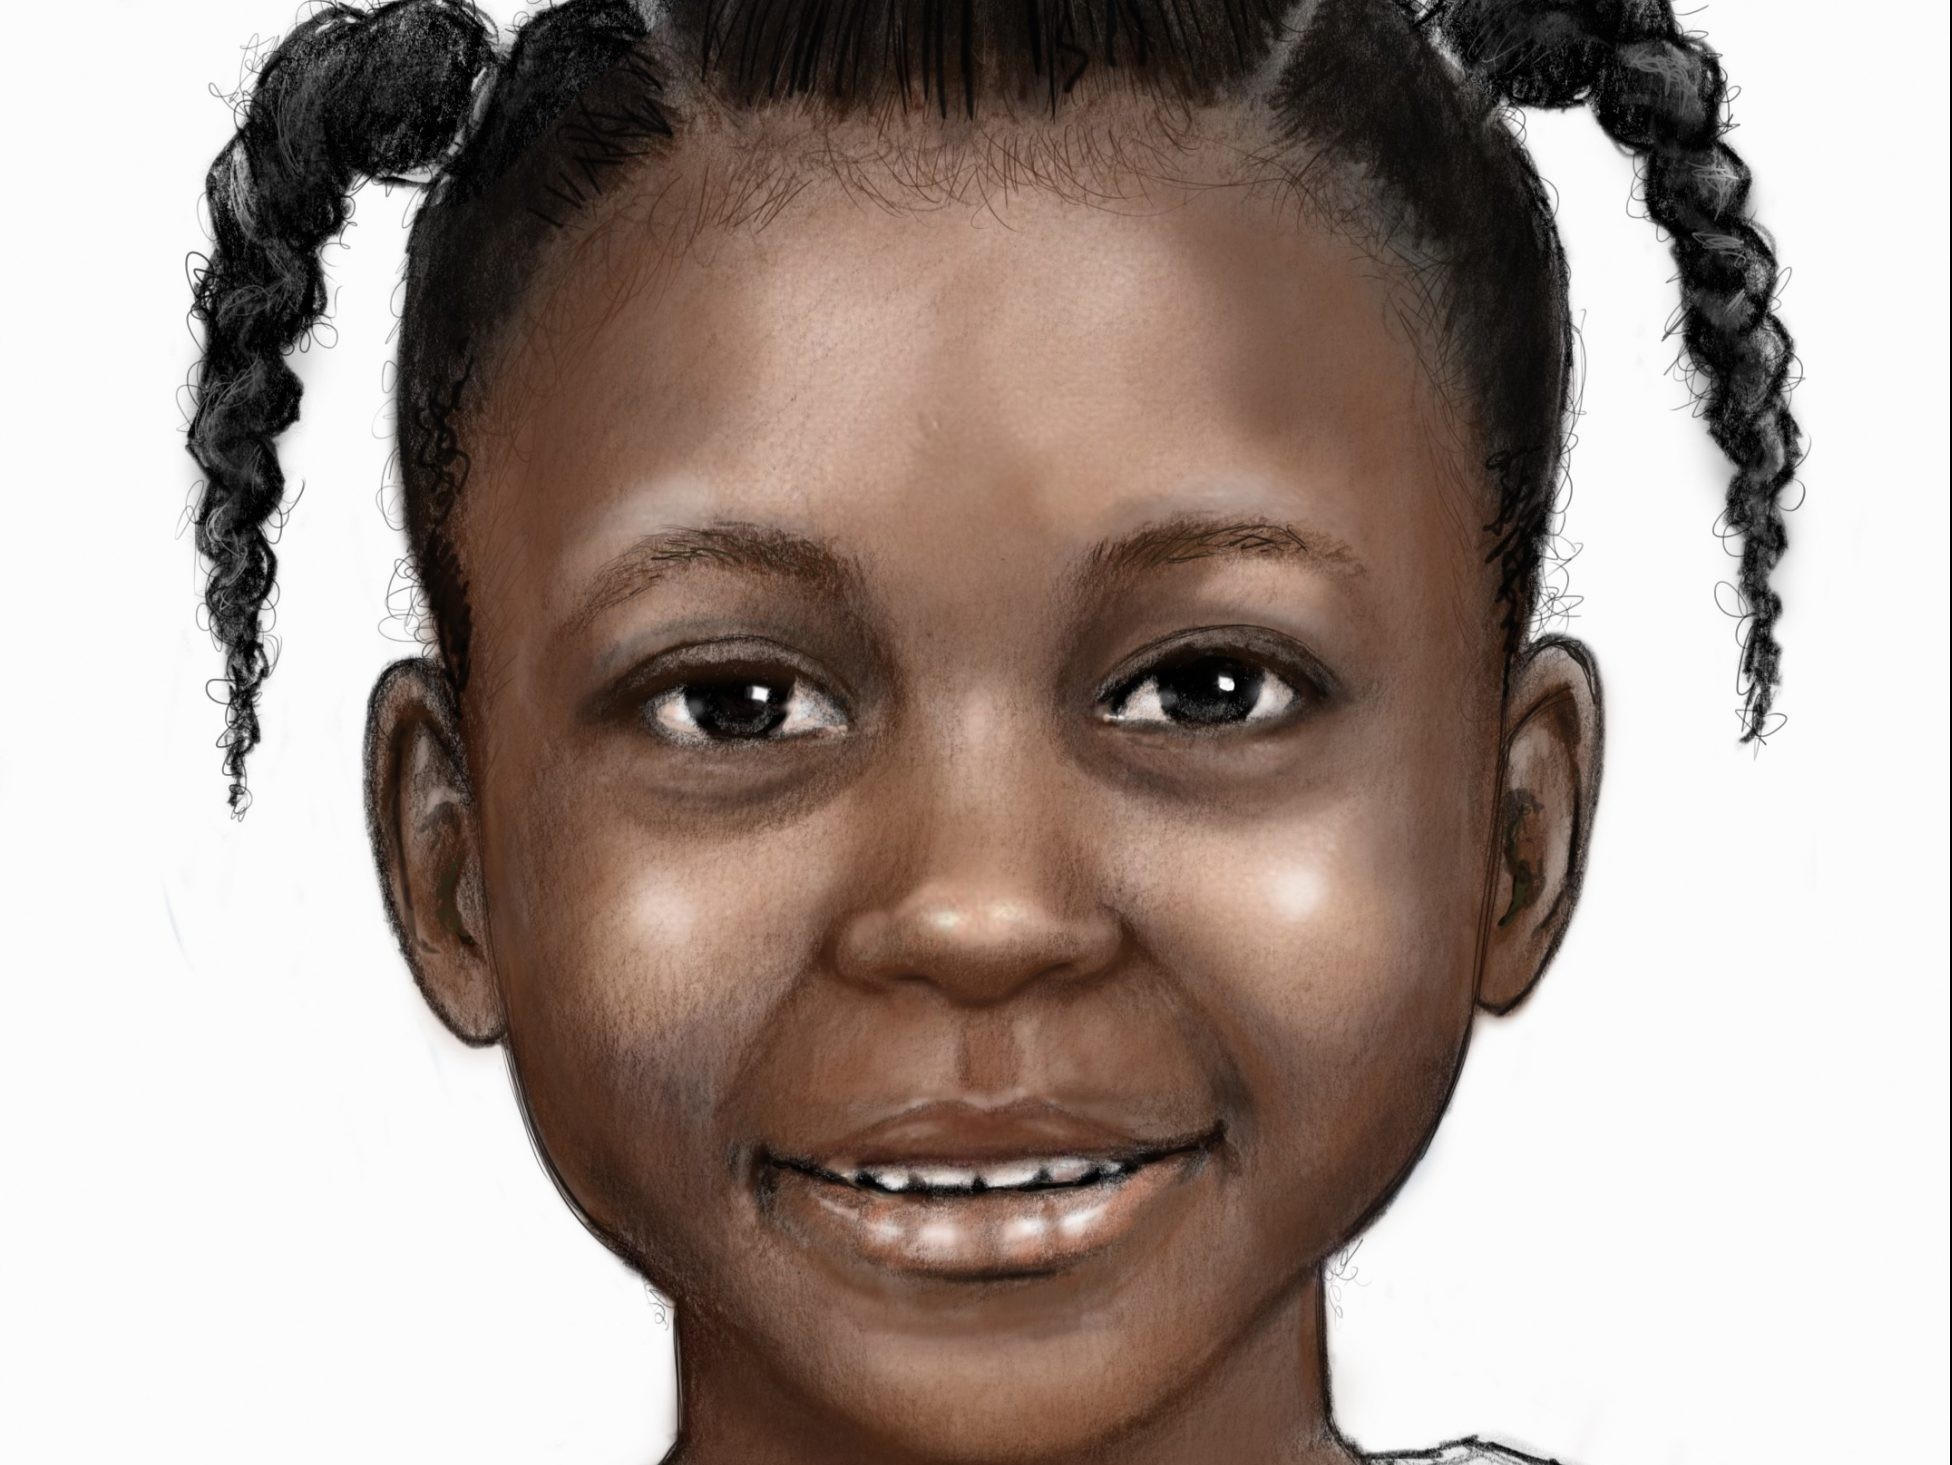 The Toronto Police Service has released composite sketches of a little girl and a photo of a vehicle of interest as part of a human remains investigation.